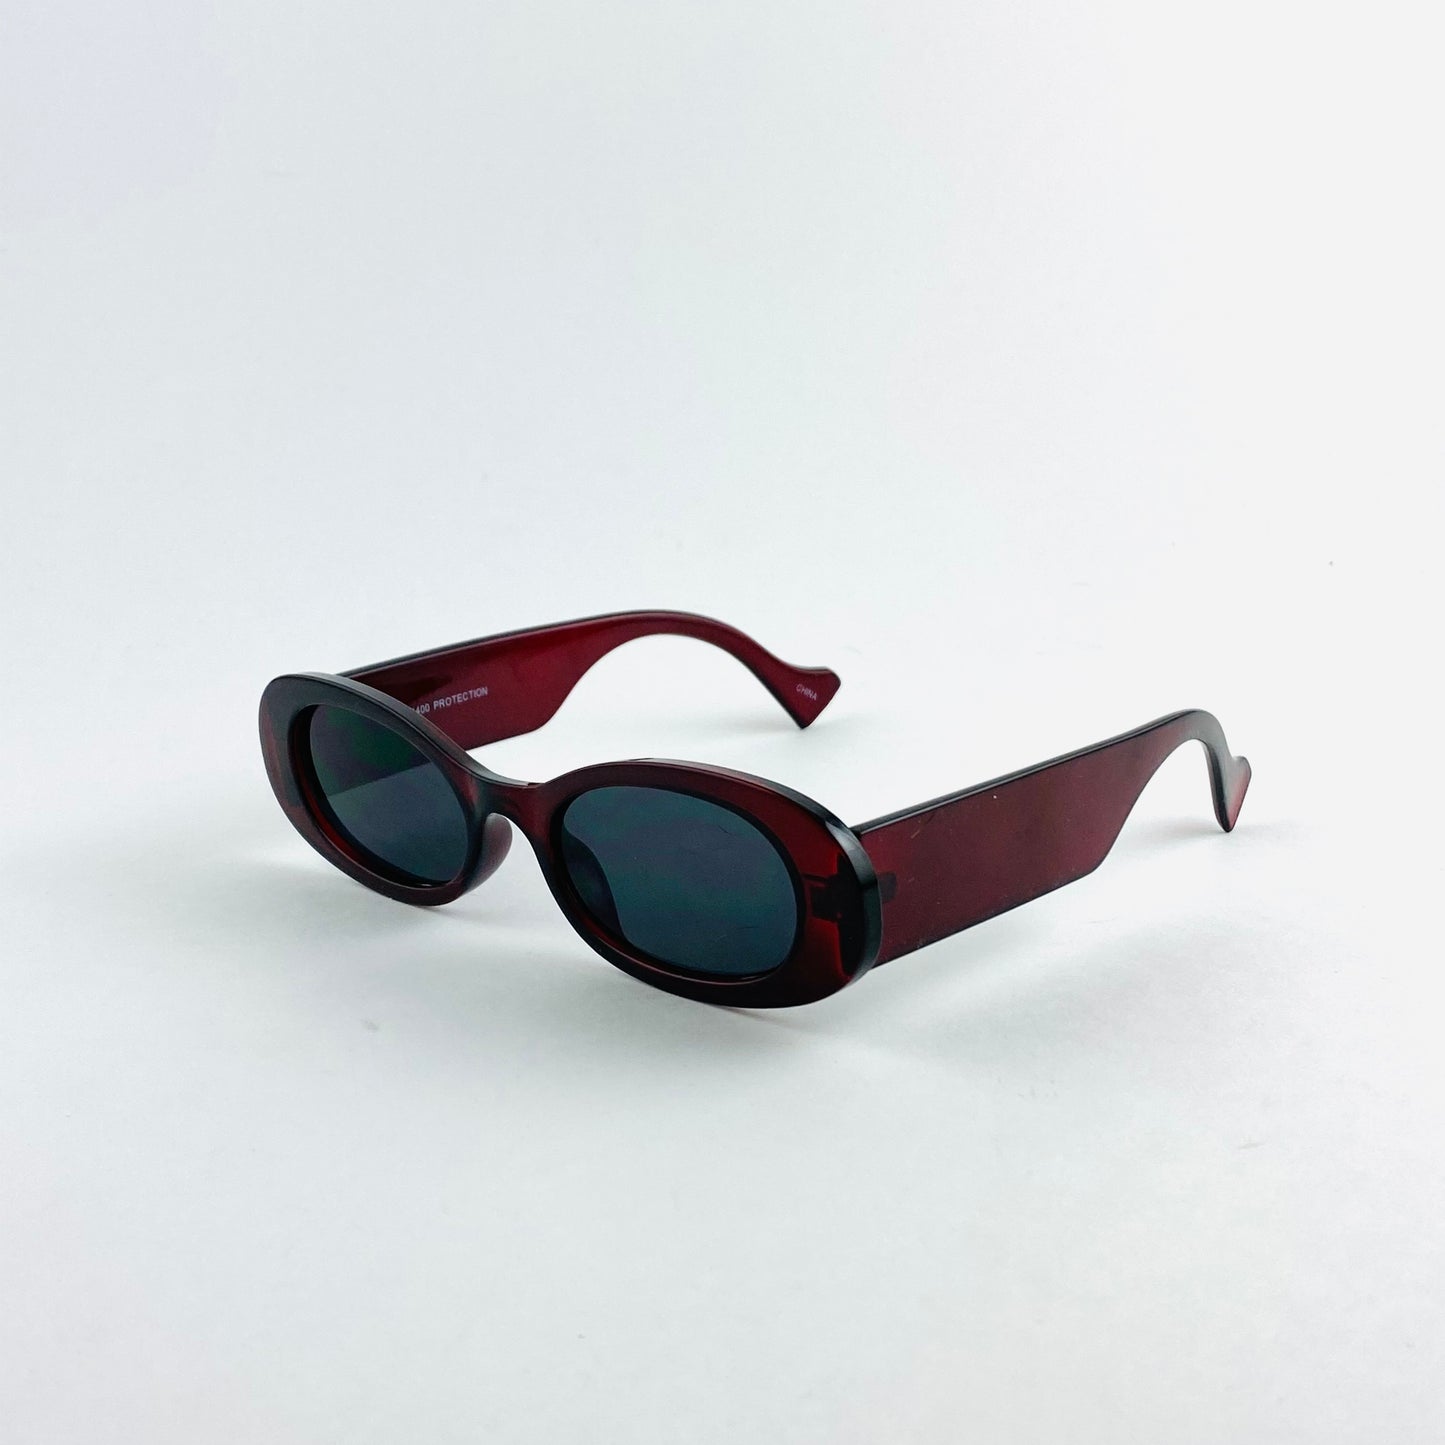 Mod style rectangle oversized sunglasses with thick frames and dark colored tints